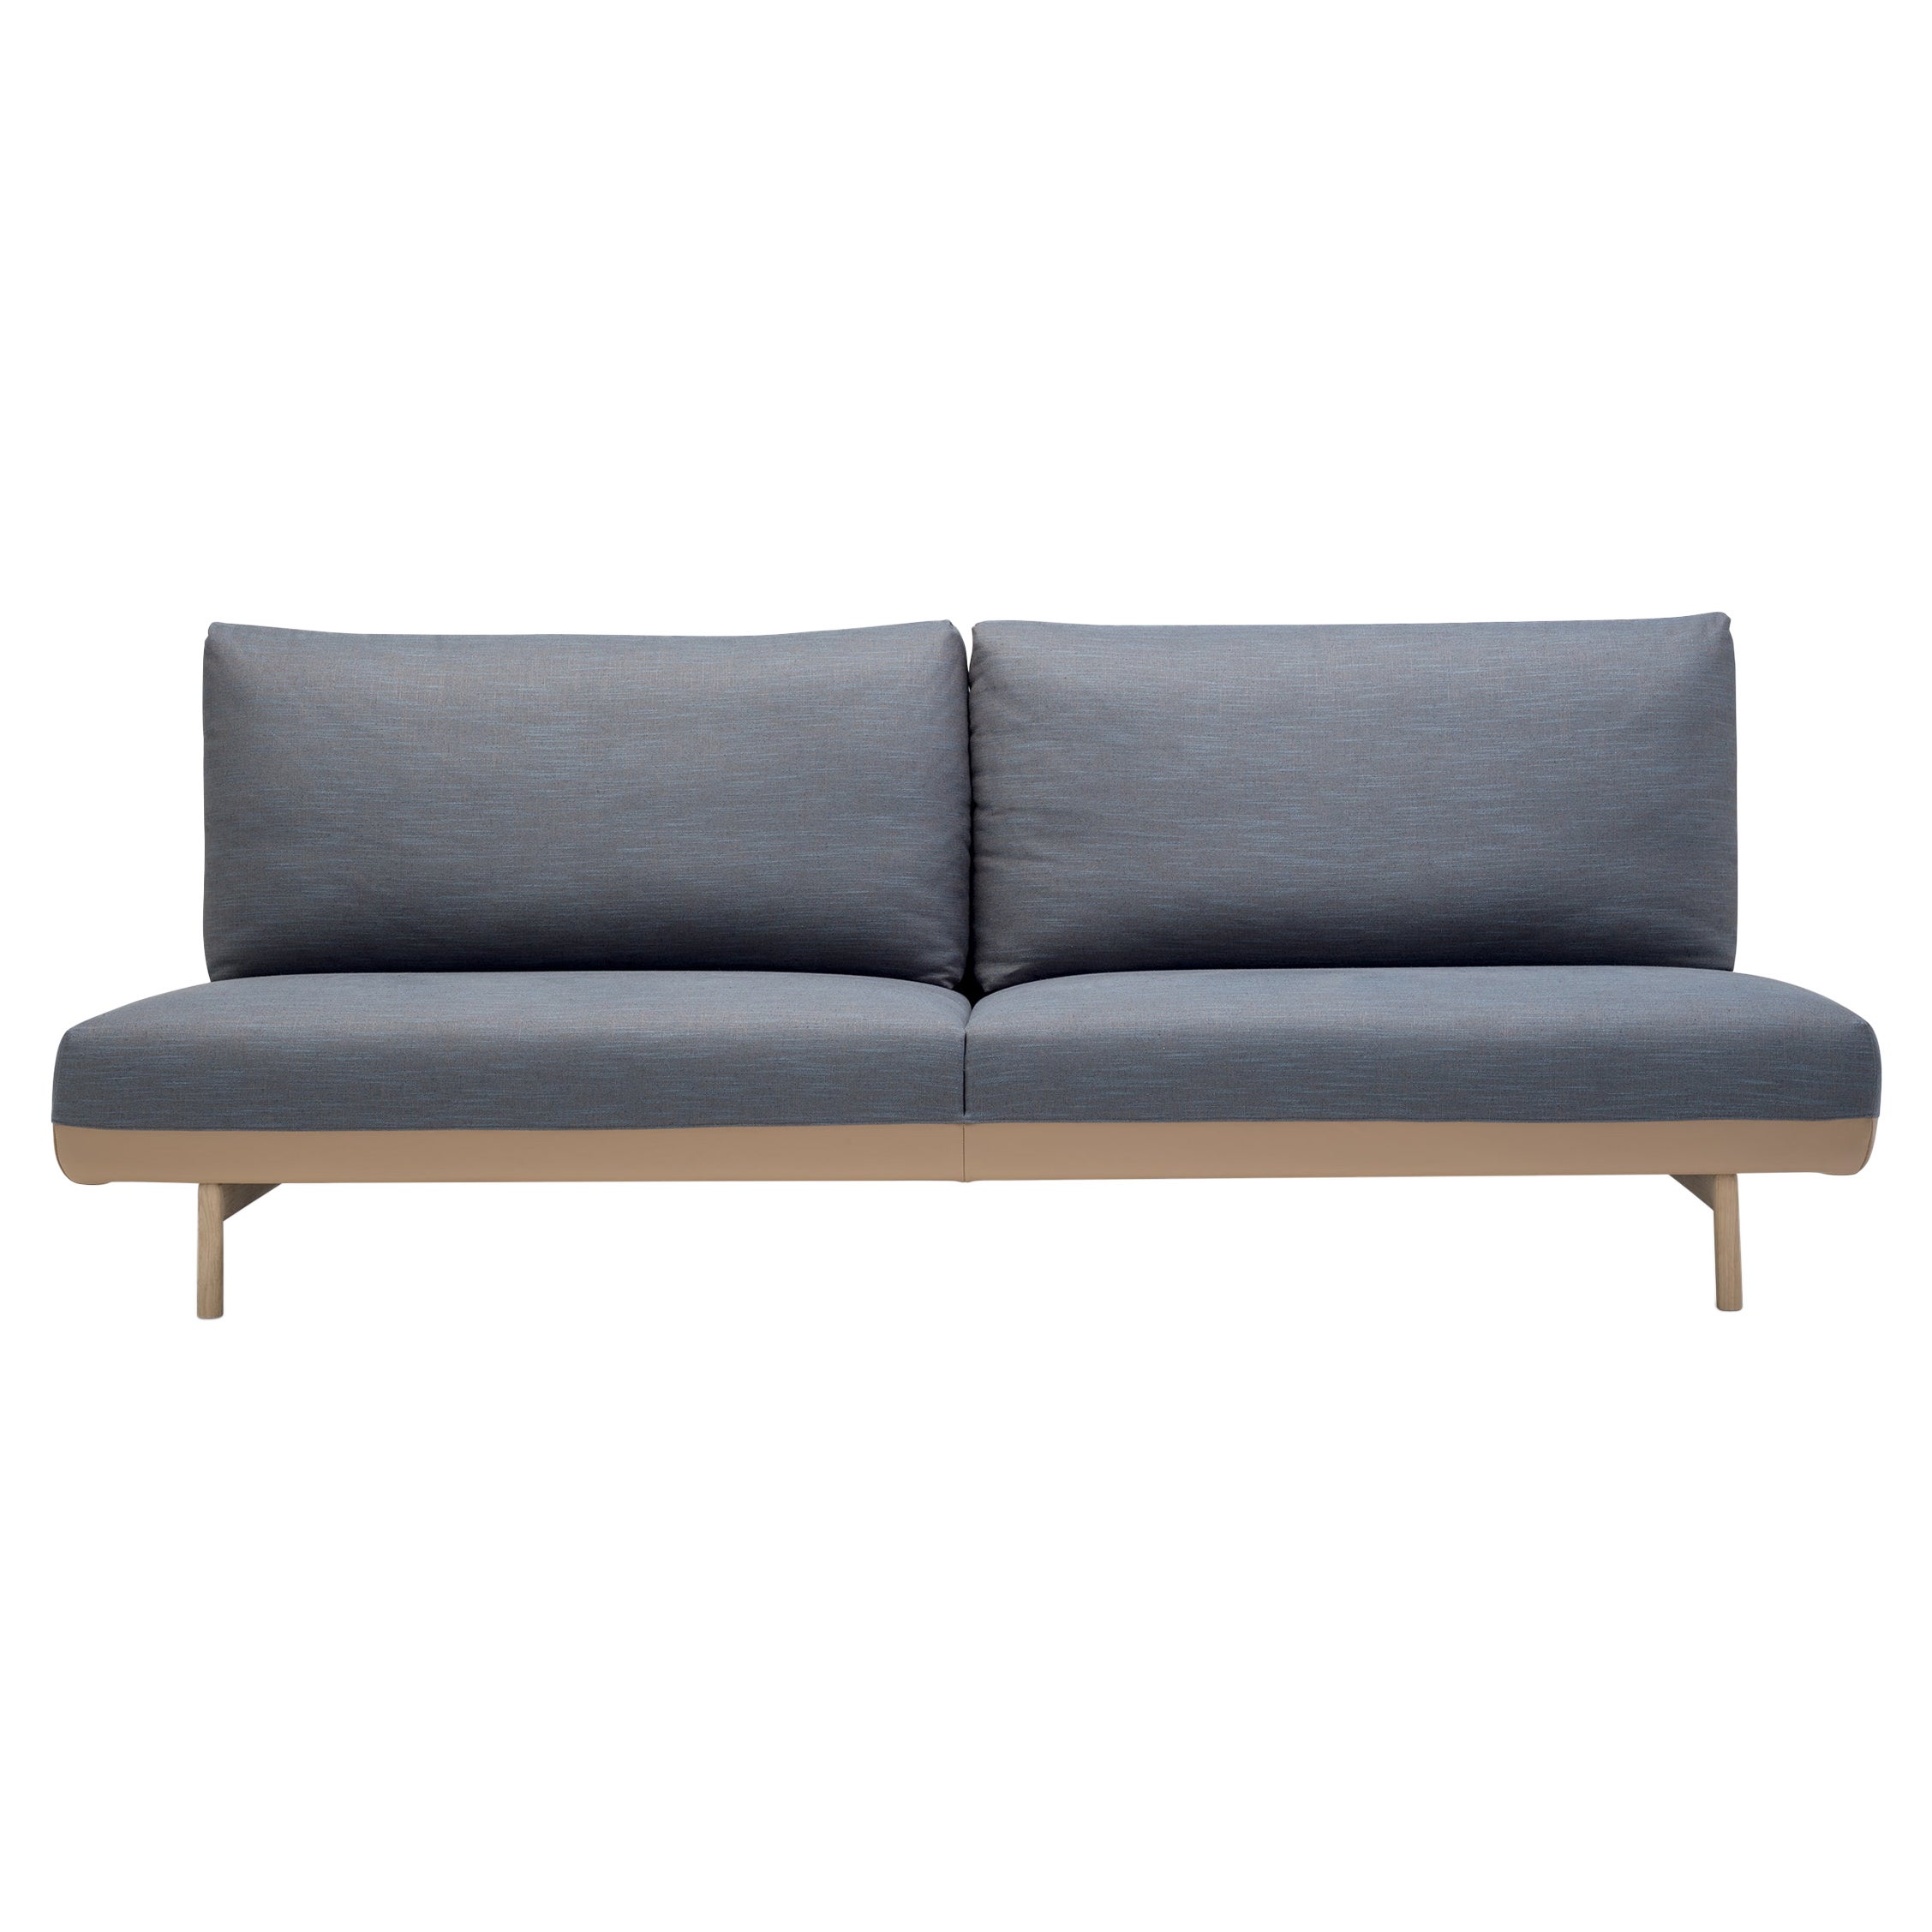 Alias D20 Trigono Two Seater Sofa in Black Upholstery with Natural Oak Frame